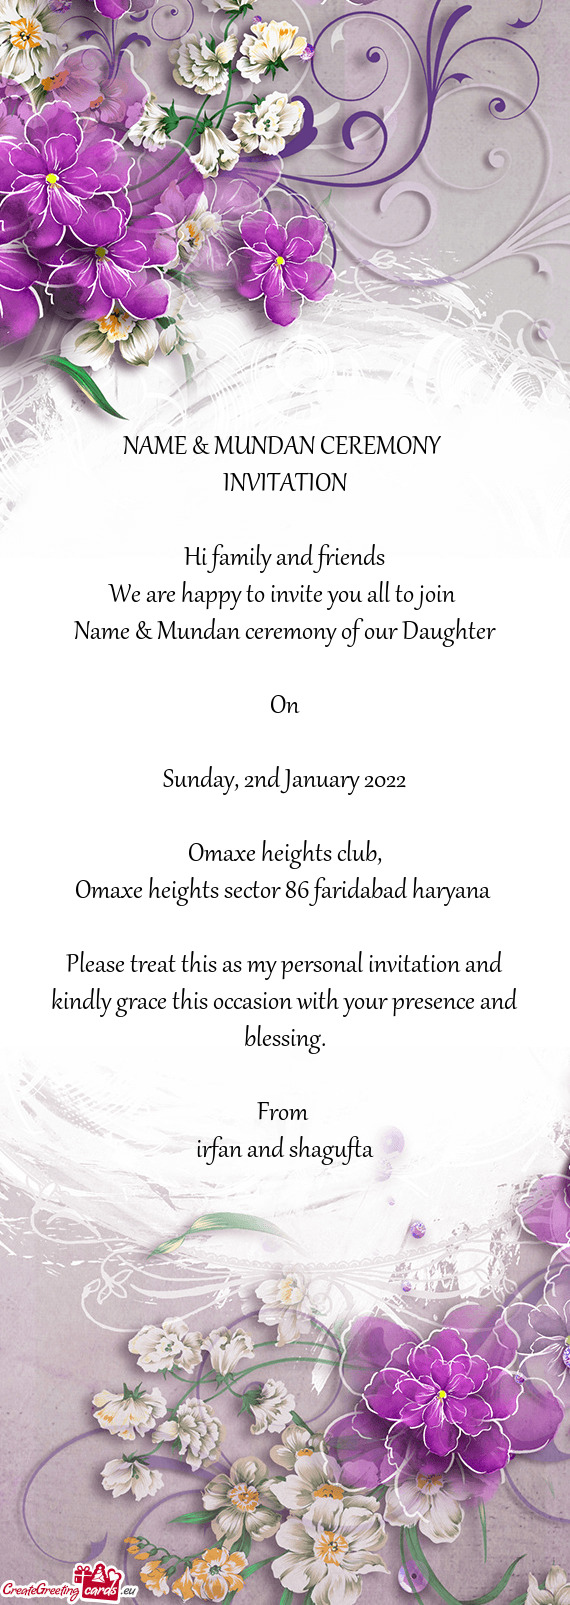 Name & Mundan ceremony of our Daughter